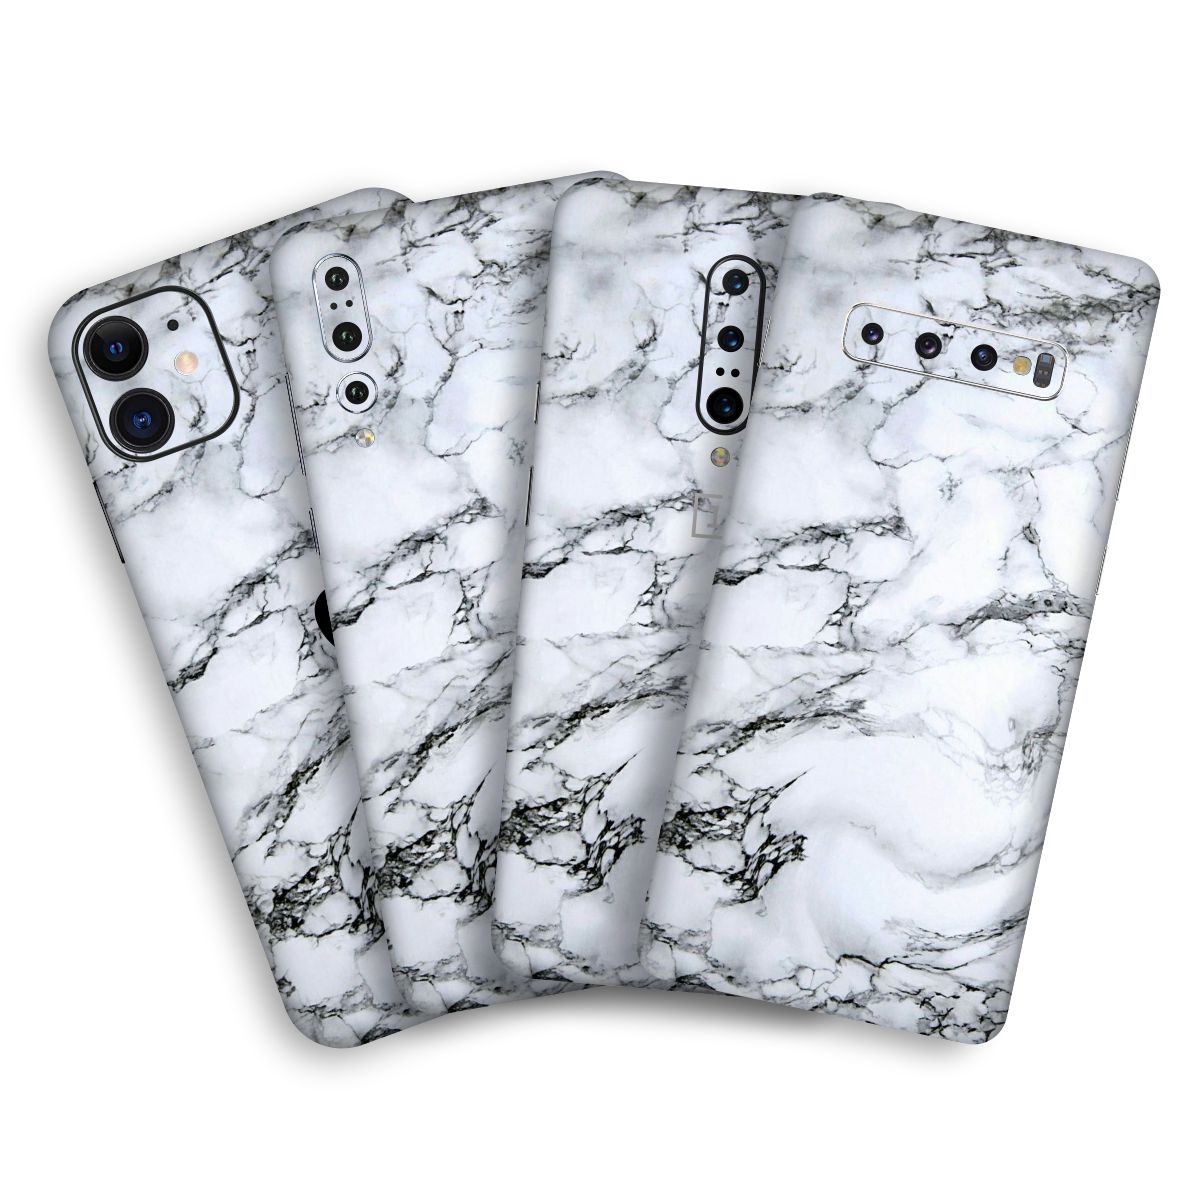 White Marble Mobile Skin / Mobile Wrap for Htc U11+